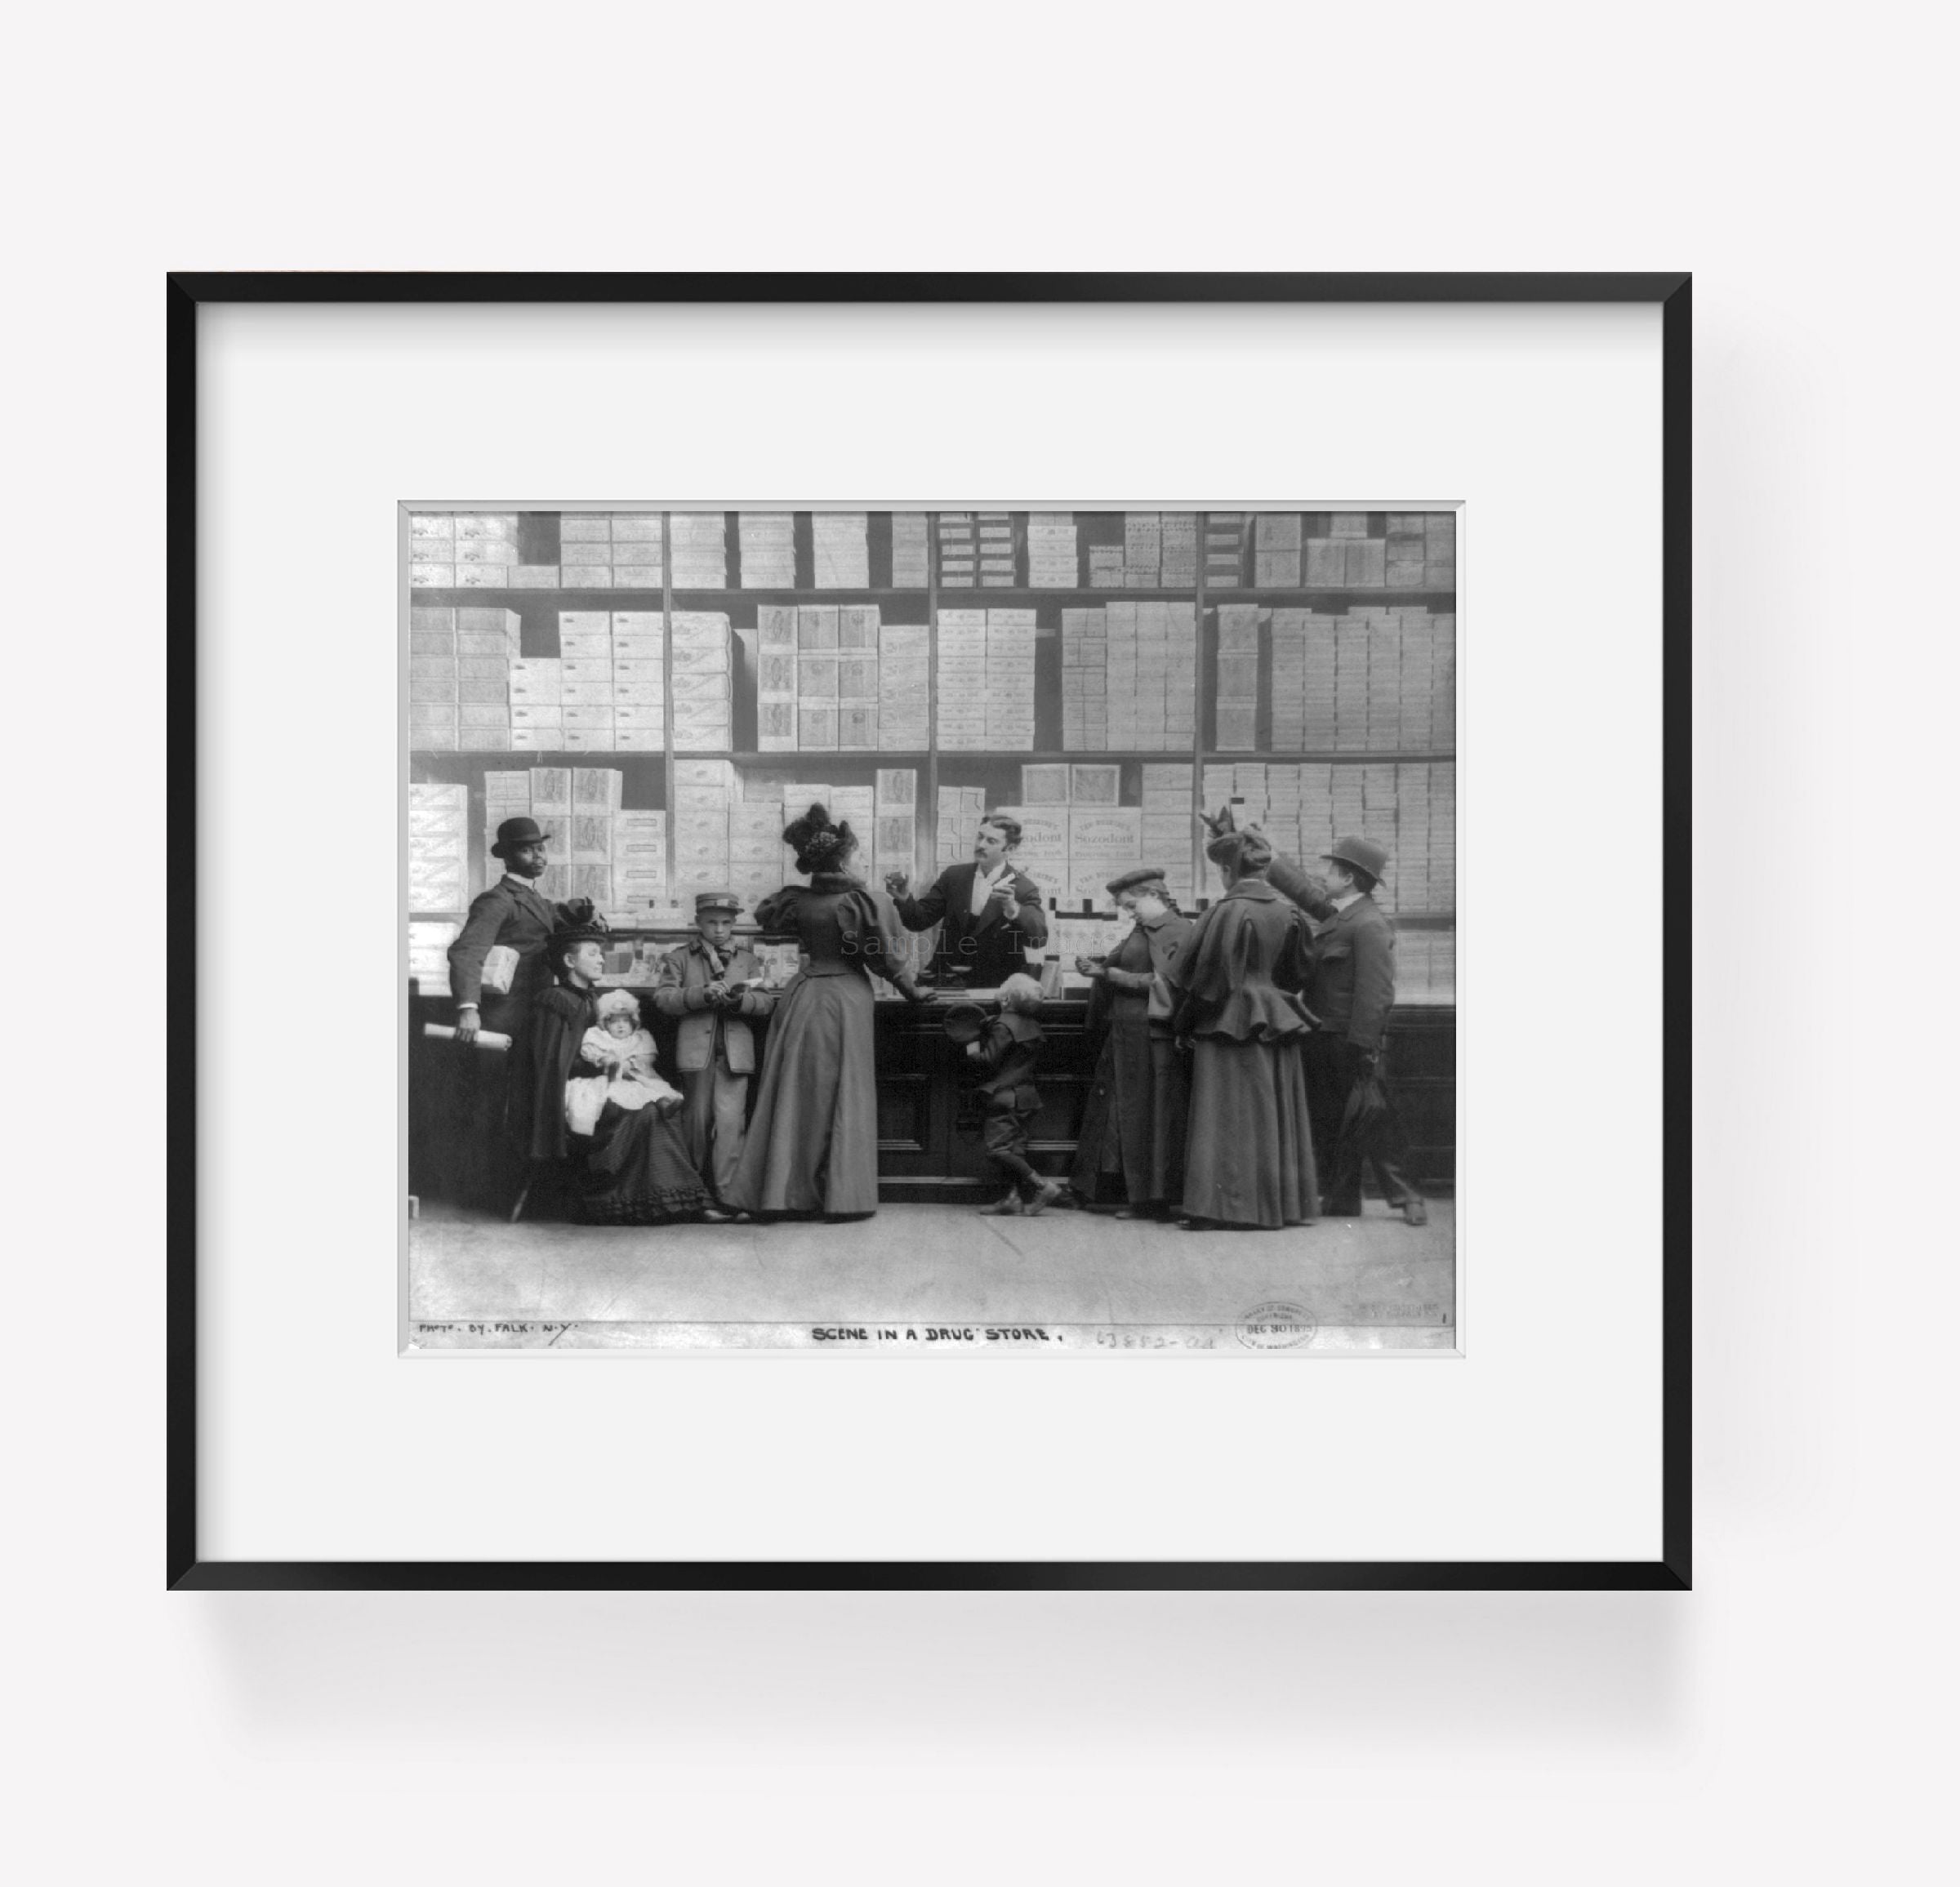 c1895 photograph of Scene in a drugstore